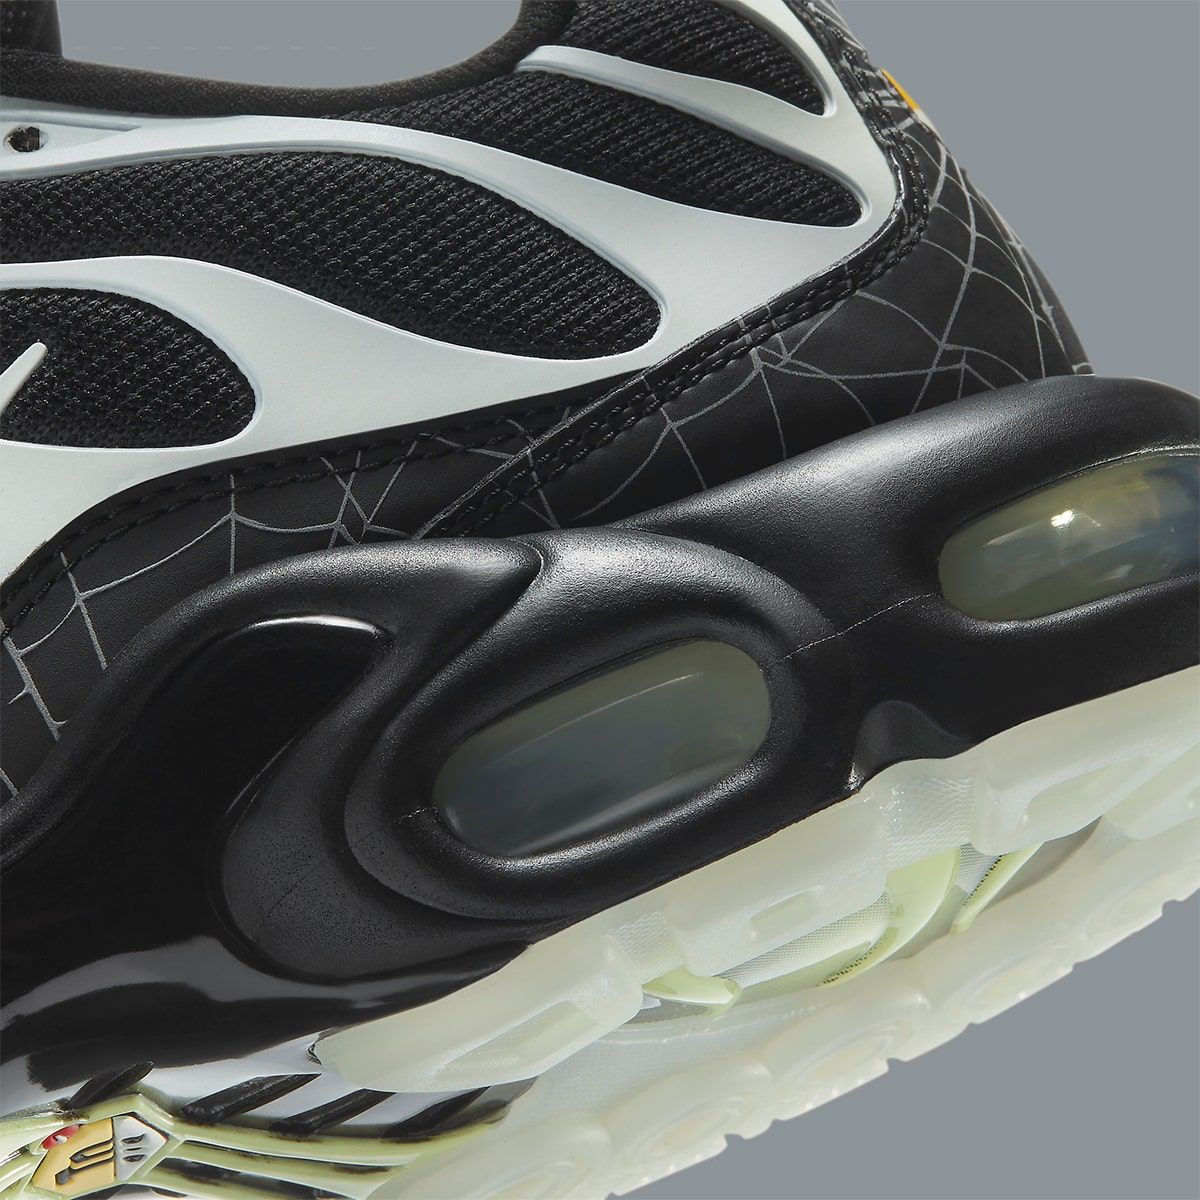 Nike Get a Lil' Spooky on the Air Max Plus “Spider Web” | HOUSE OF HEAT